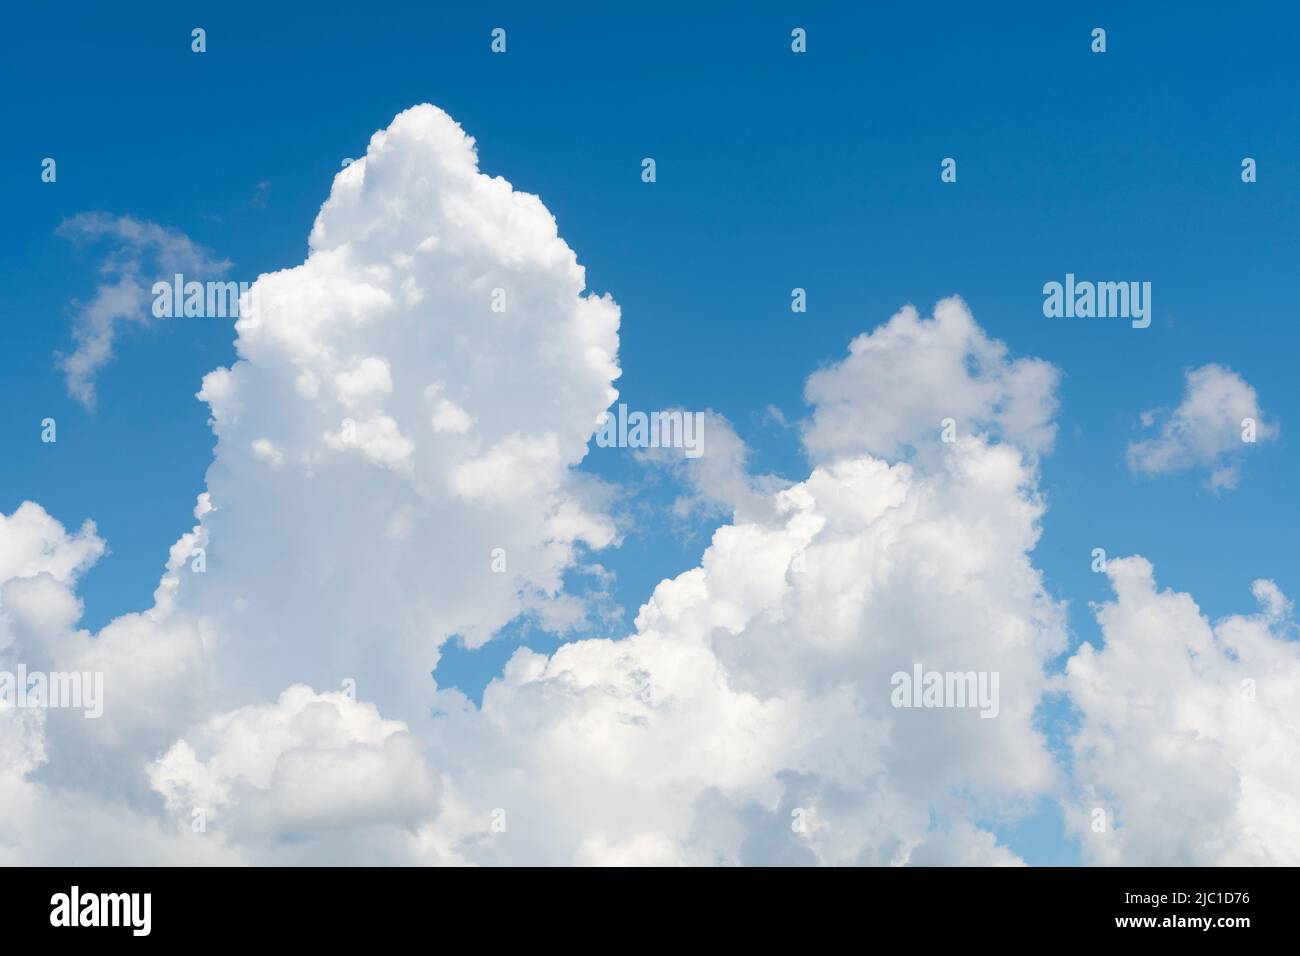 Nimbostratus clouds gather on a blue sky Stock Photo